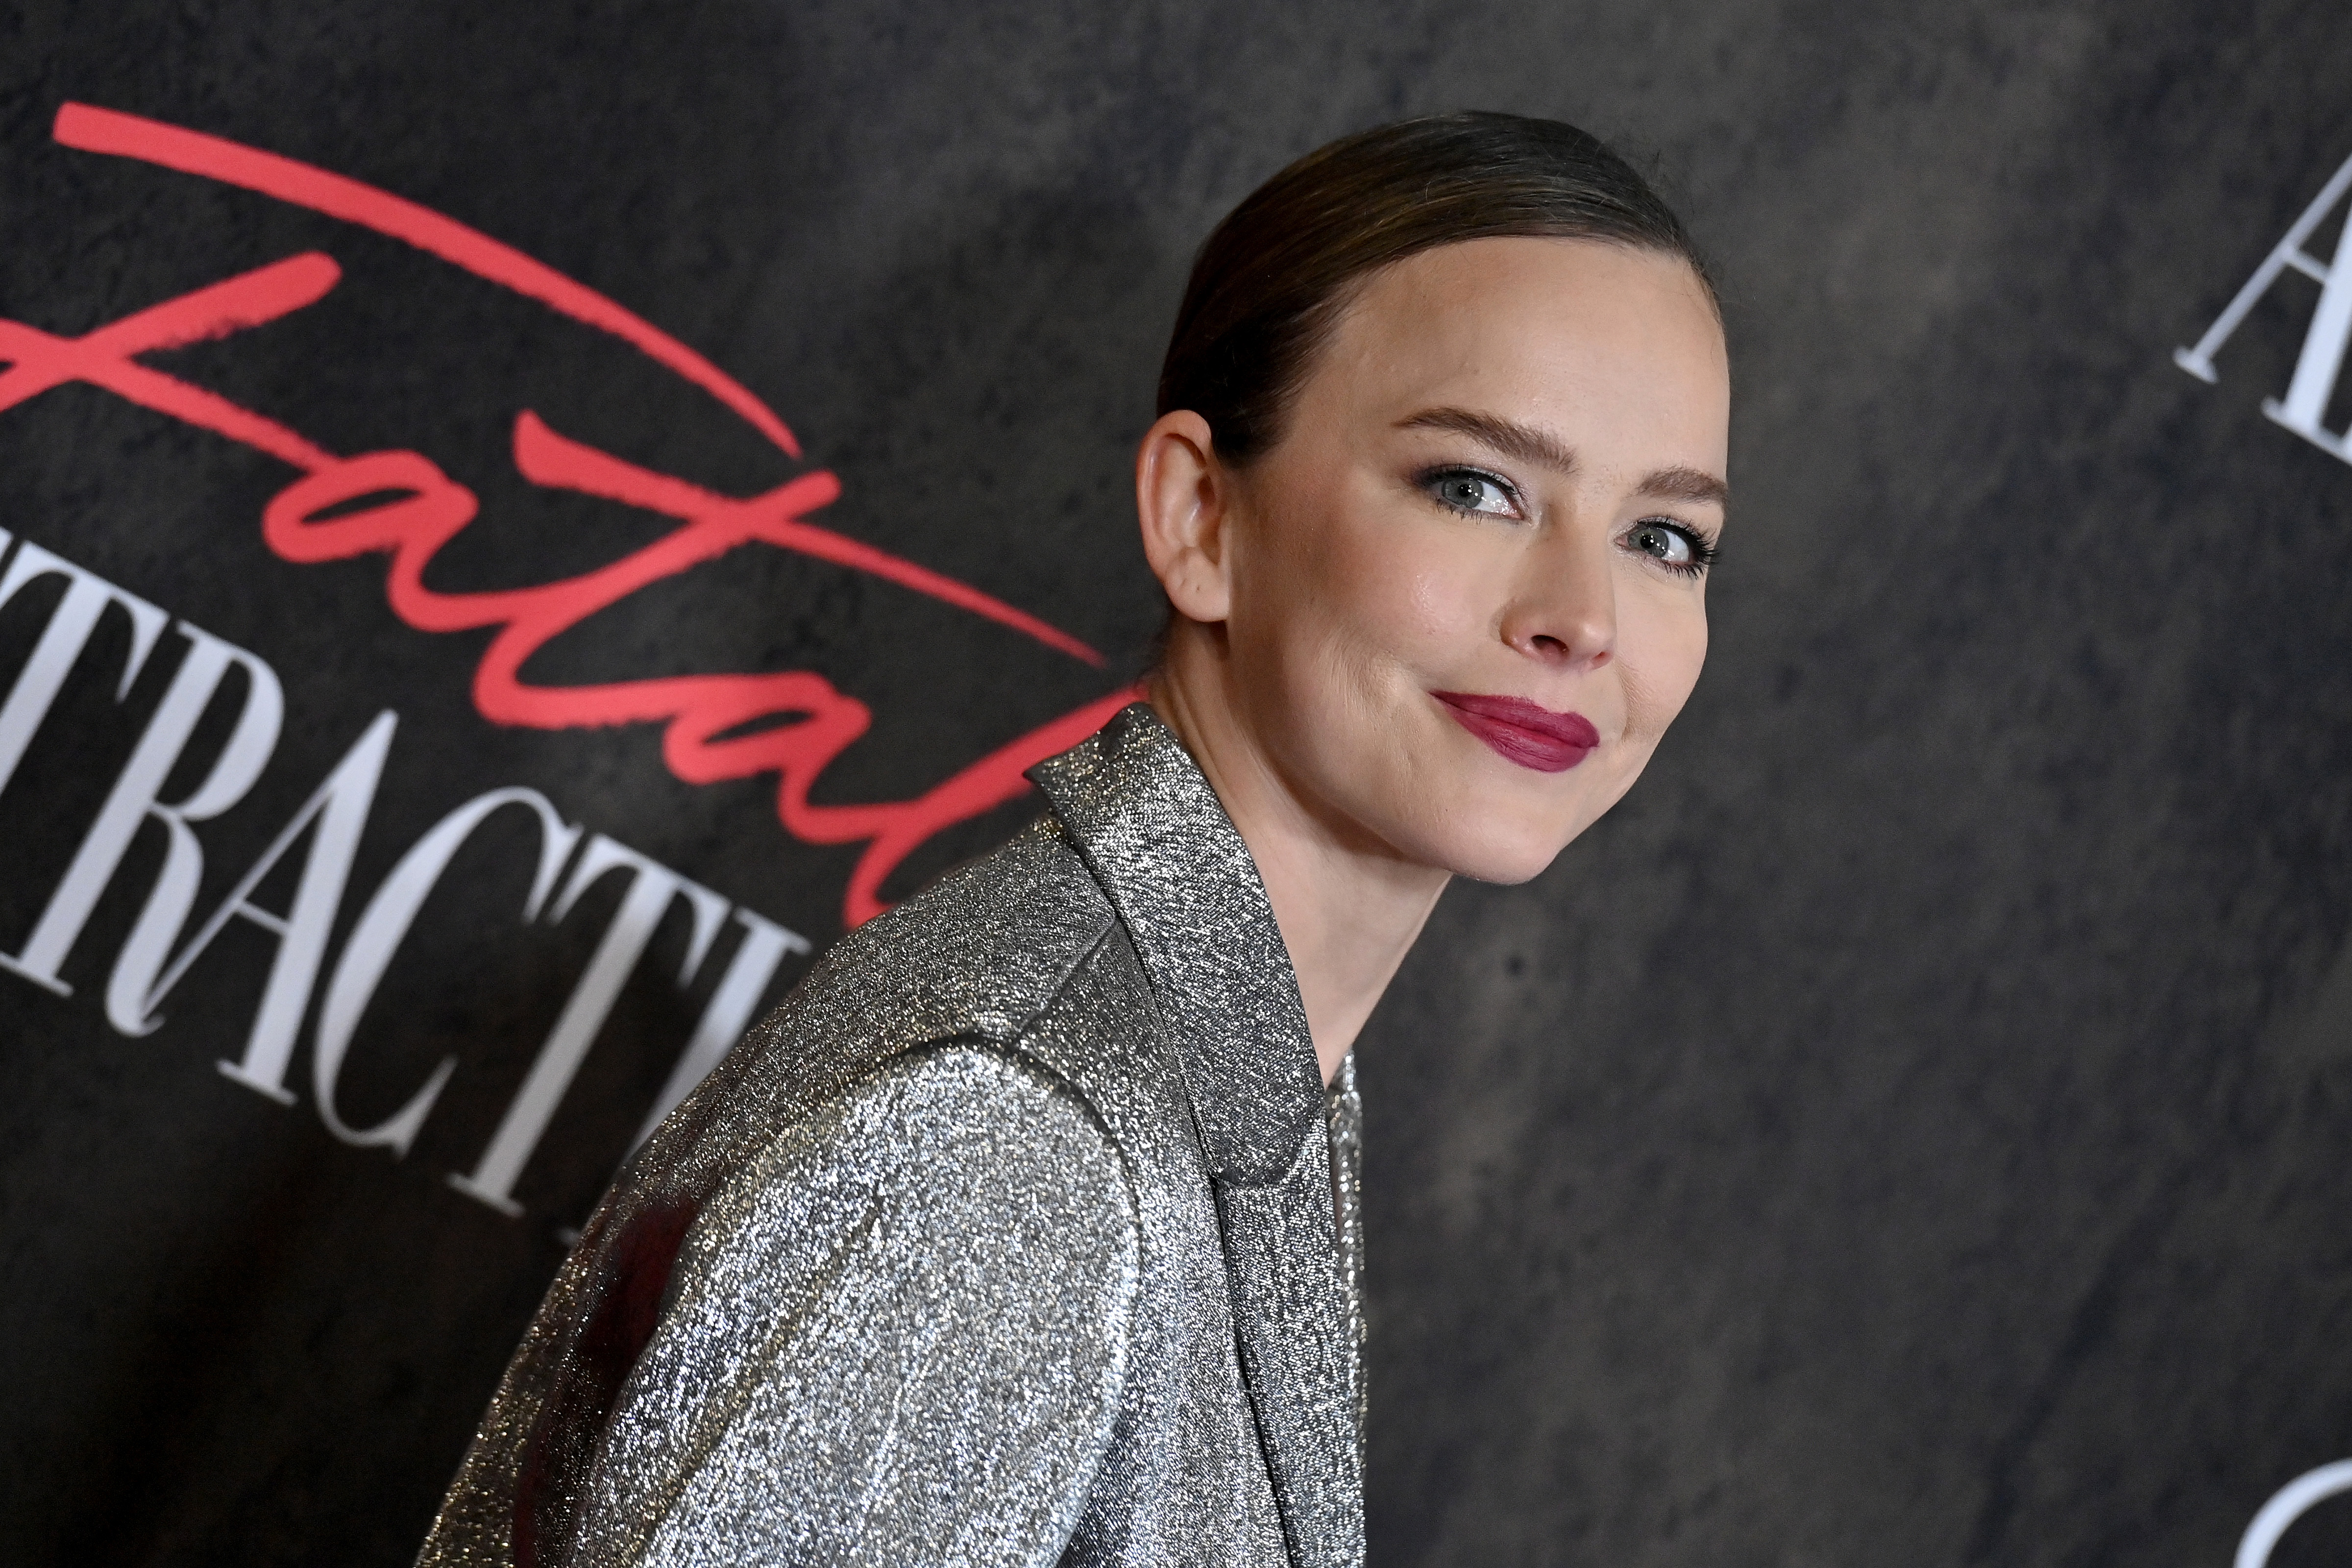 Allison Miller at the Los Angeles premiere of "Fatal Attraction" on April 24, 2023, in West Hollywood, California. | Source: Getty Images